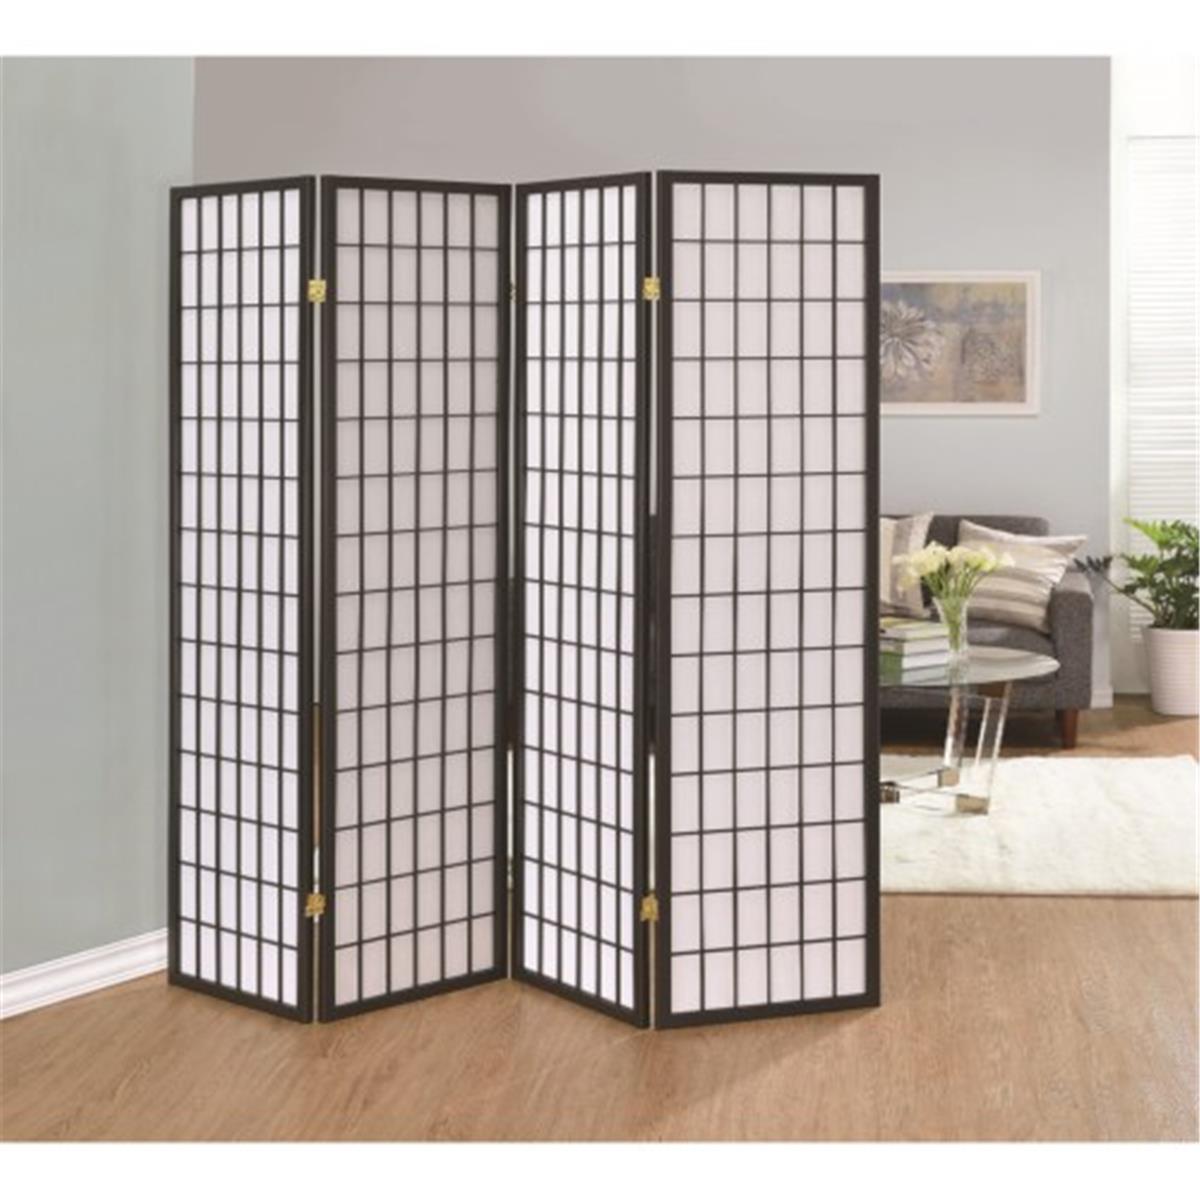 Picture of Coaster 902631 Folding Screens Four Panel Folding Screen - Gray